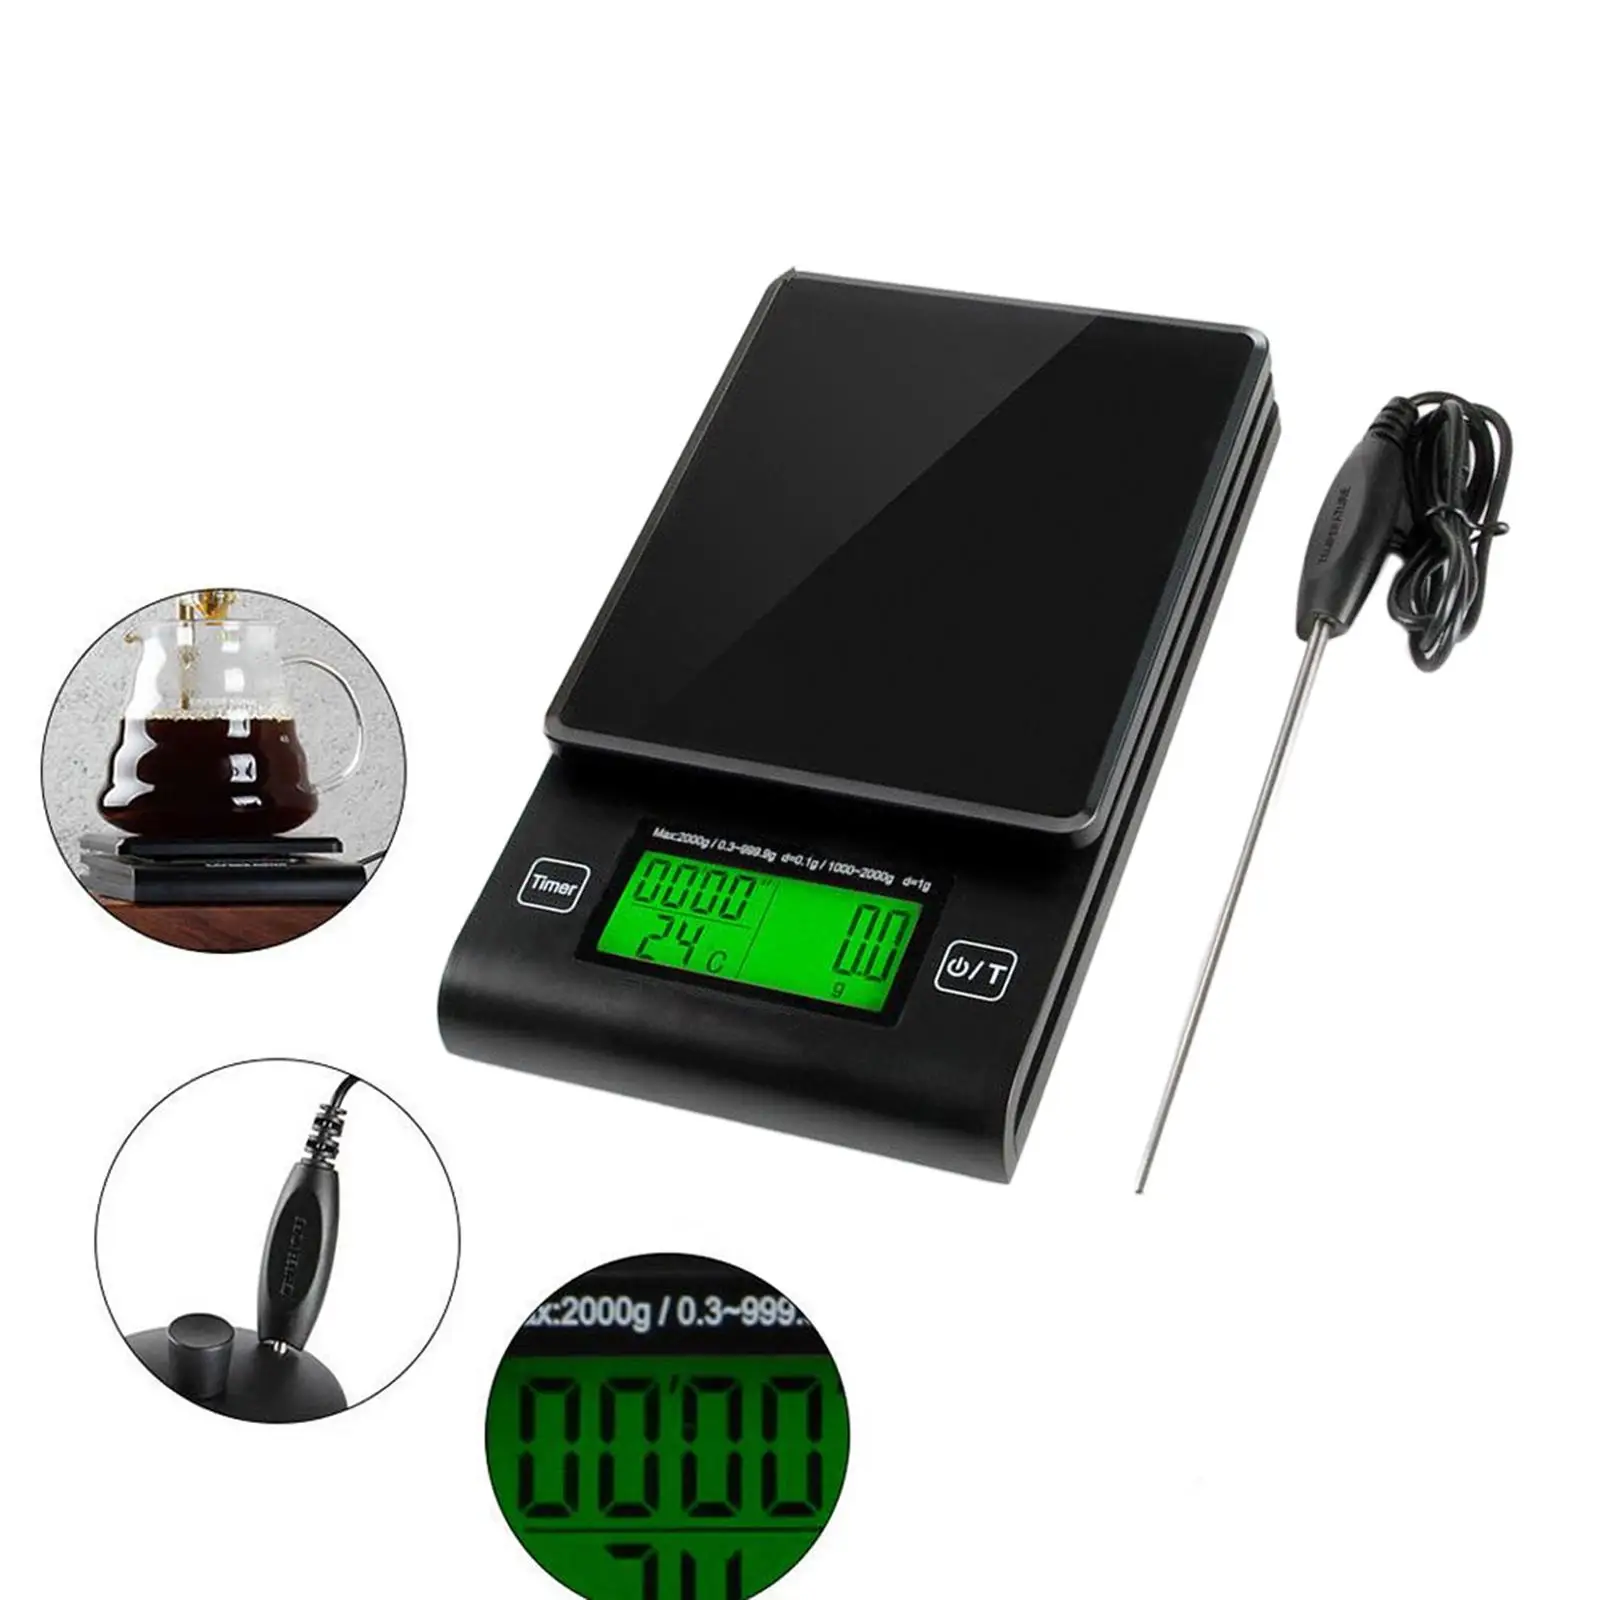 Digital Kitchen Scale Baking Cooking Pour Over Drip Coffee Scale Food Scale Electronic Espresso Scale for Cafe Restaurant Home